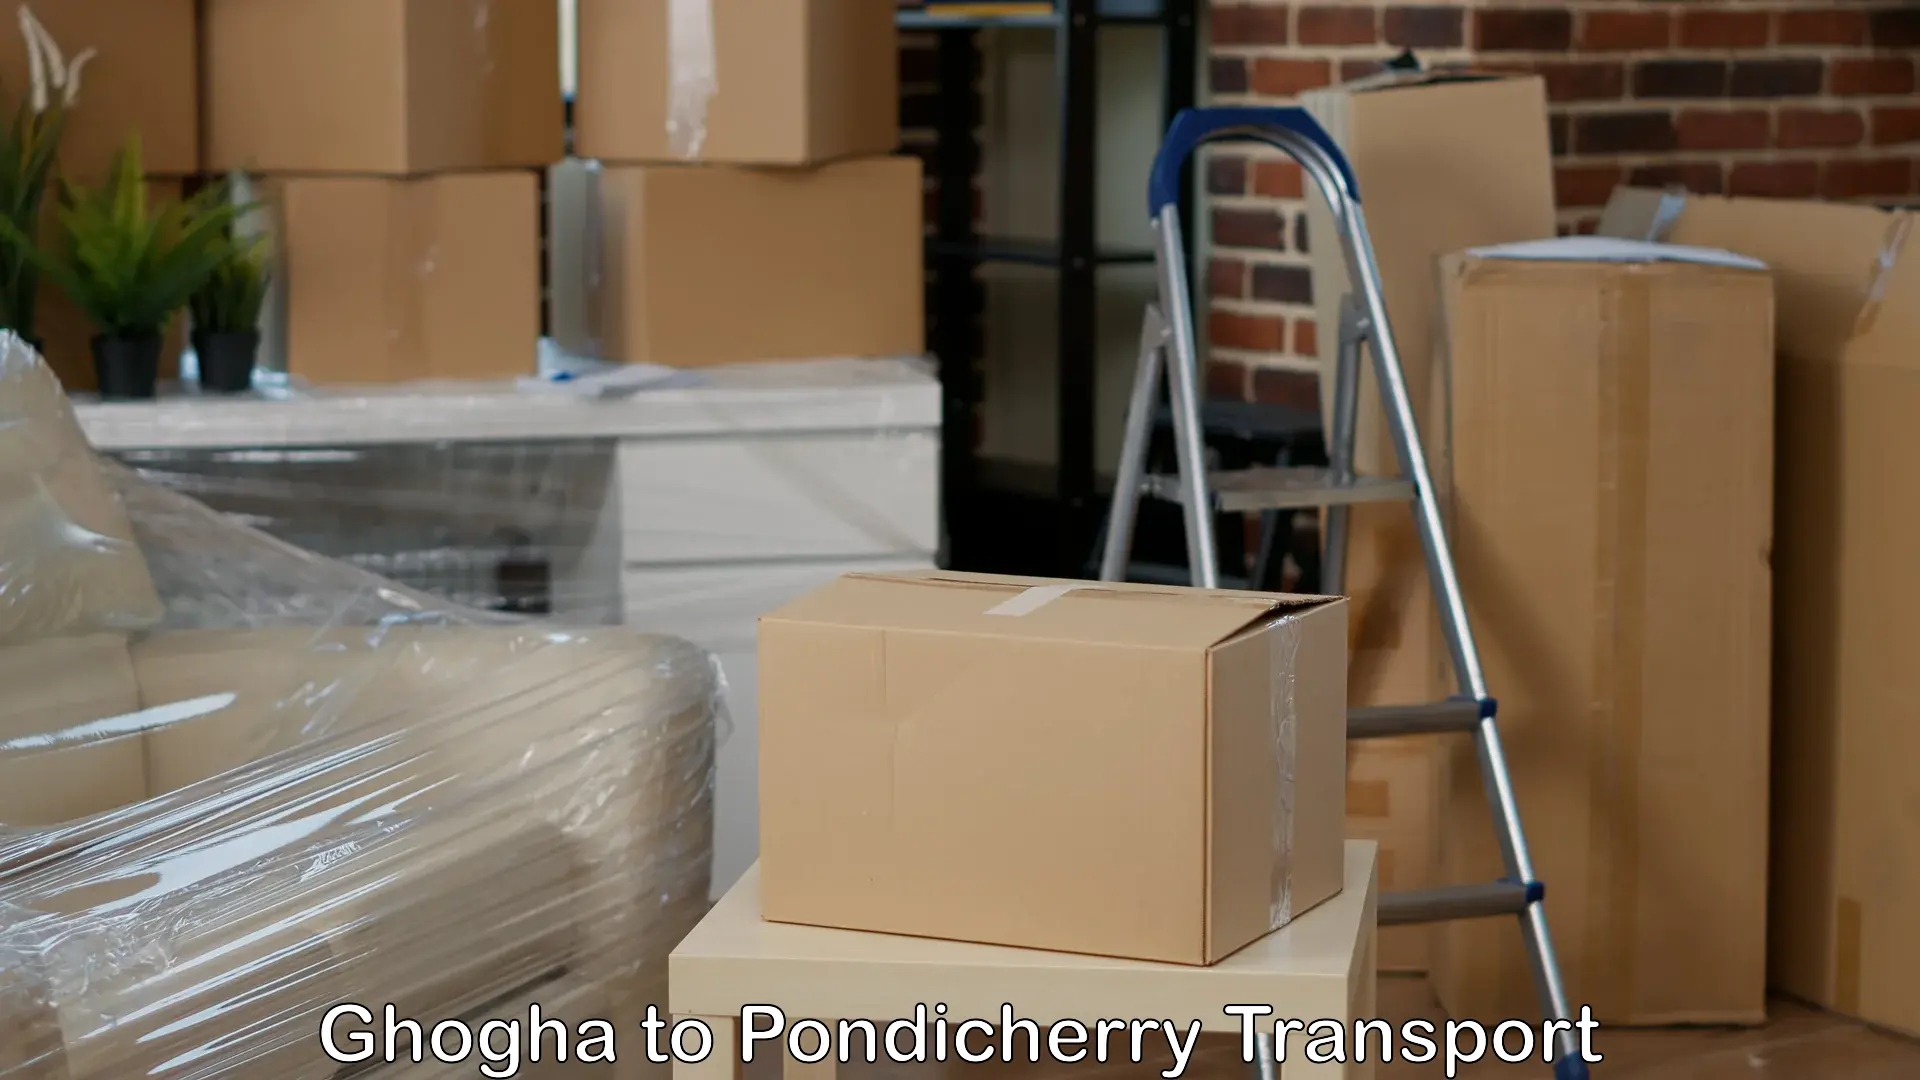 Air freight transport services Ghogha to Pondicherry